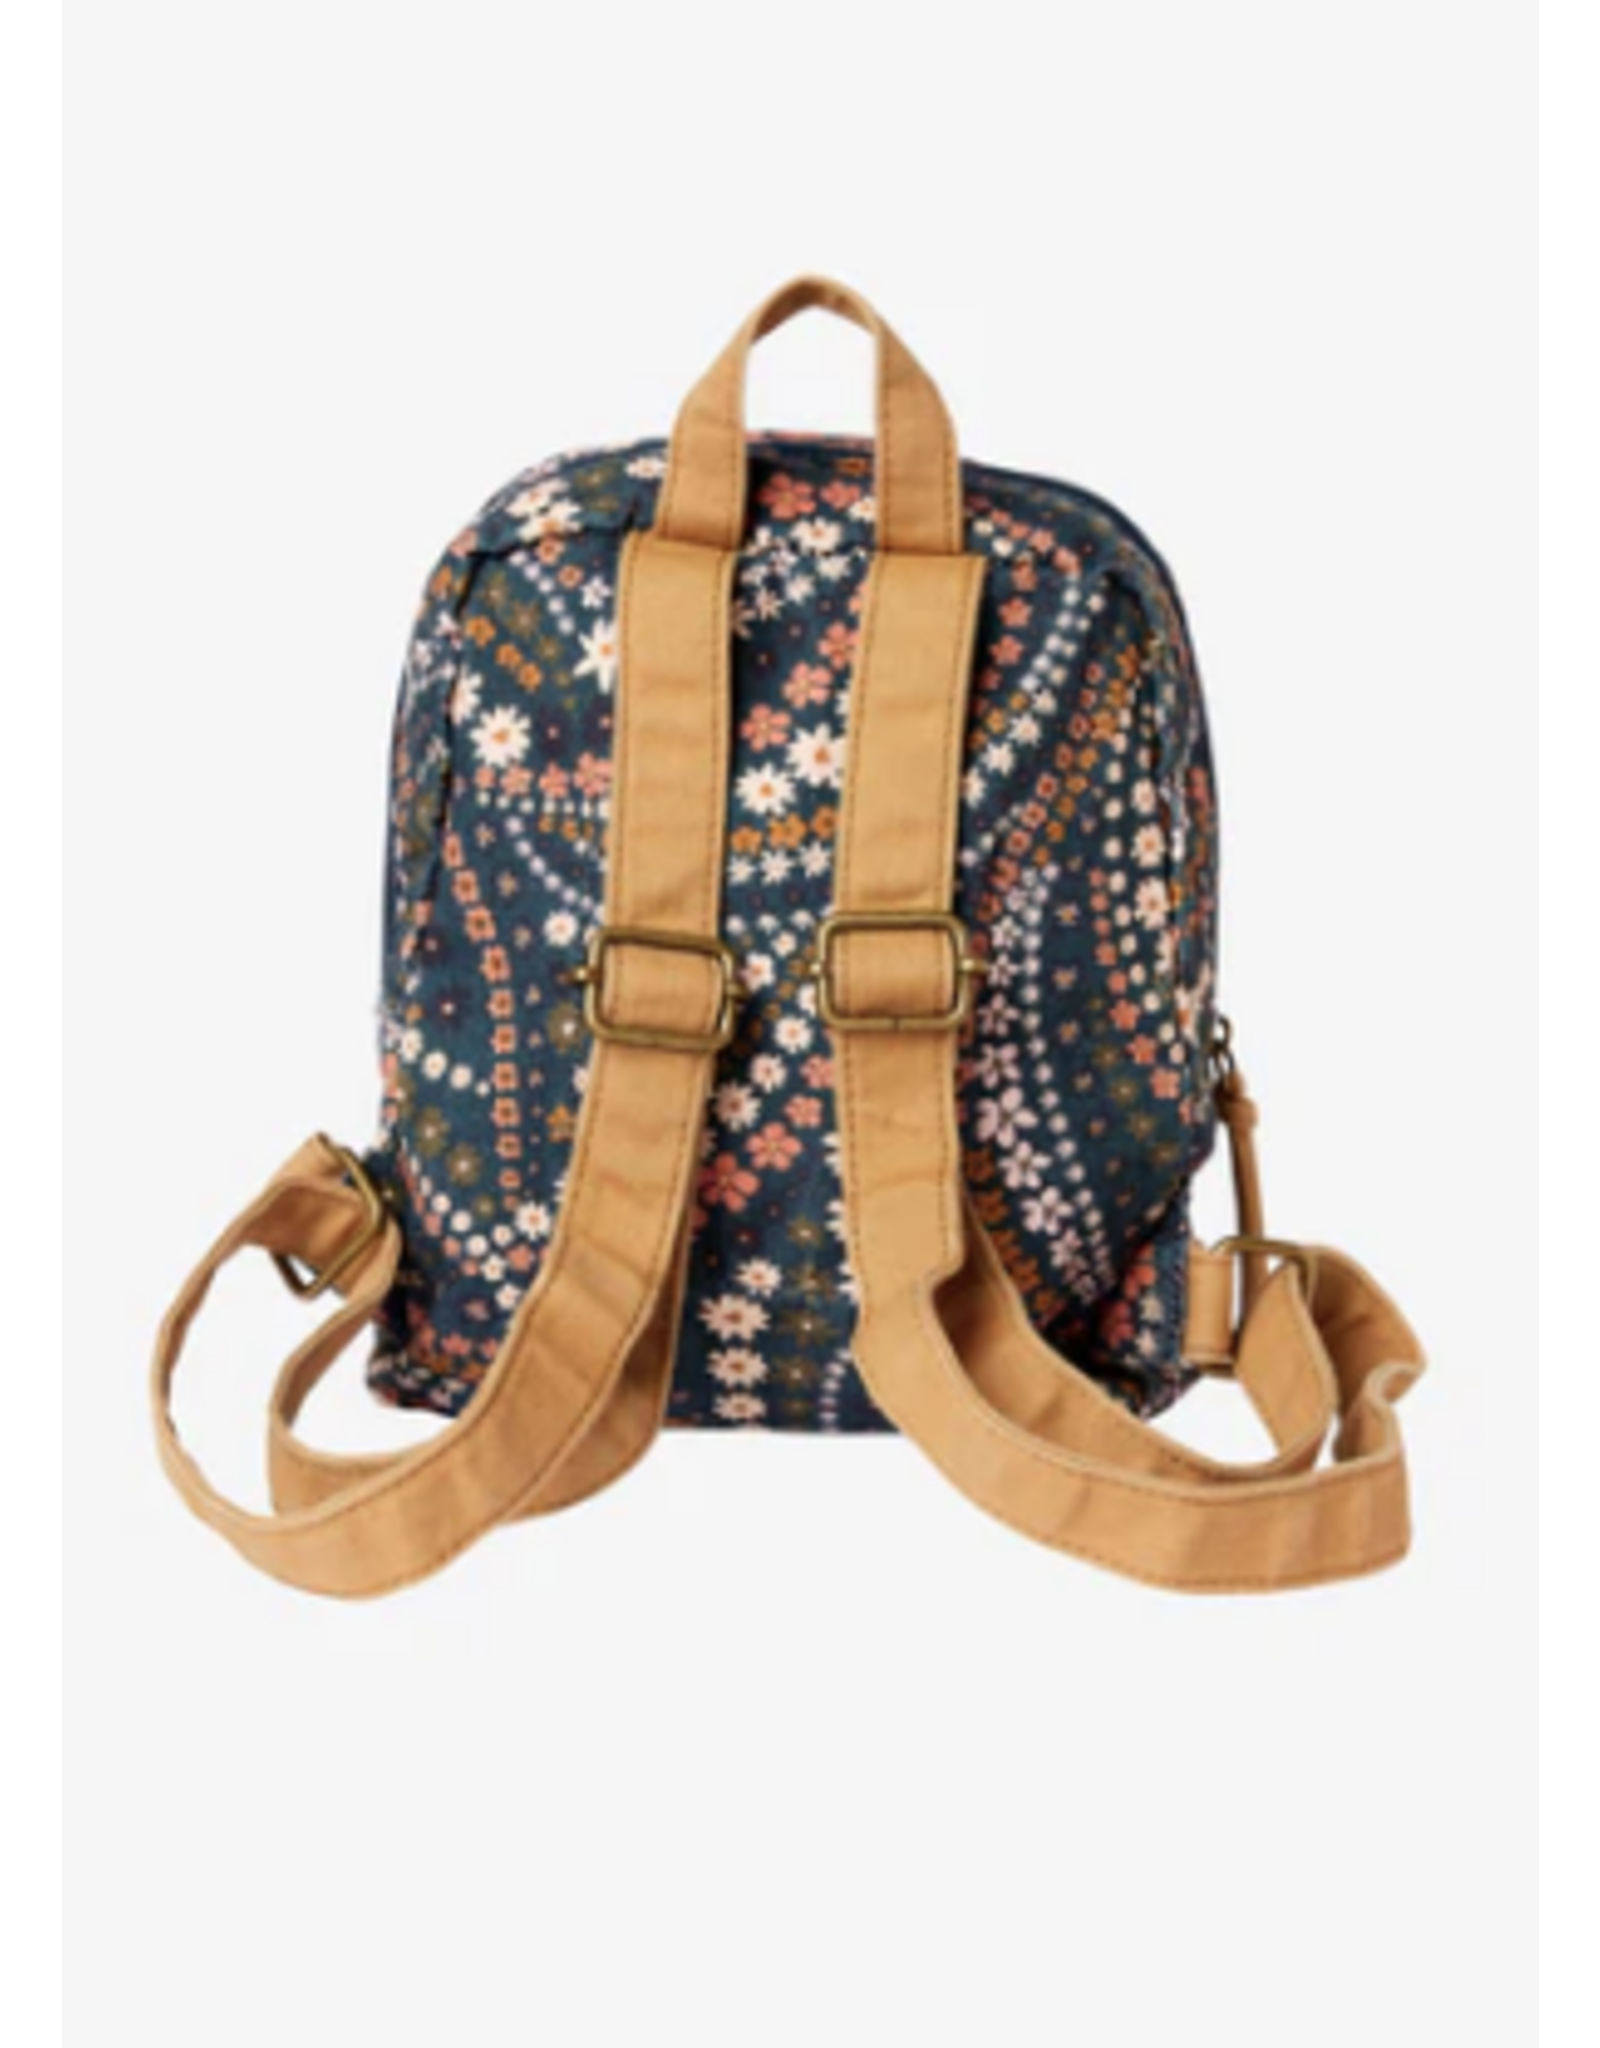 ONEILL VALLEY MINI BACKPACK